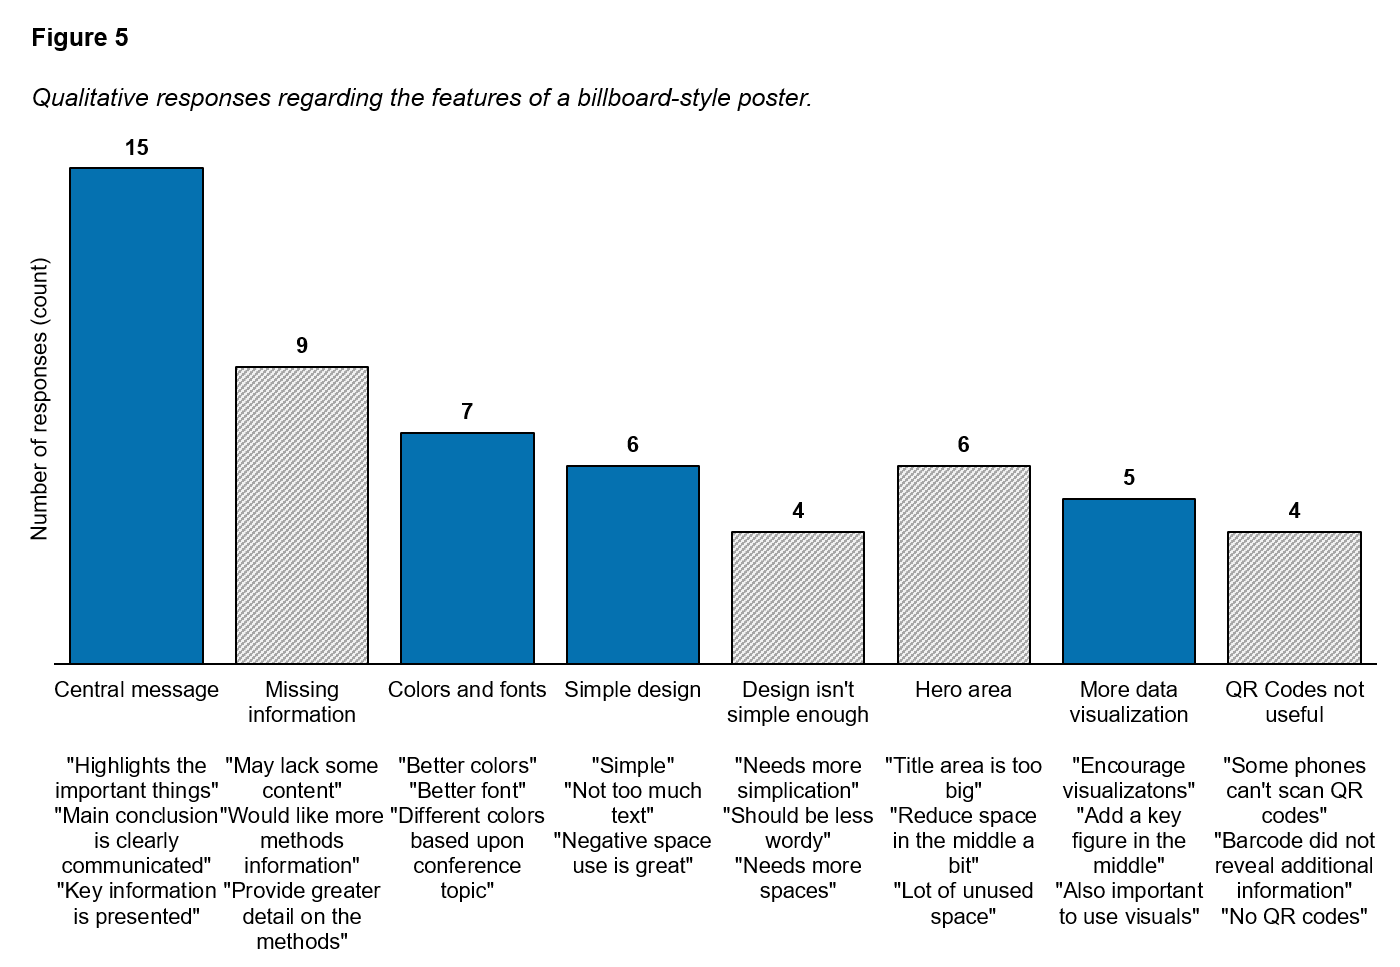 Qualitative responses regarding the features of a billboard-style poster. Blue bars indicate comments that support a positive regard for the billboard-style poster, with grey bars indicating negative comments.